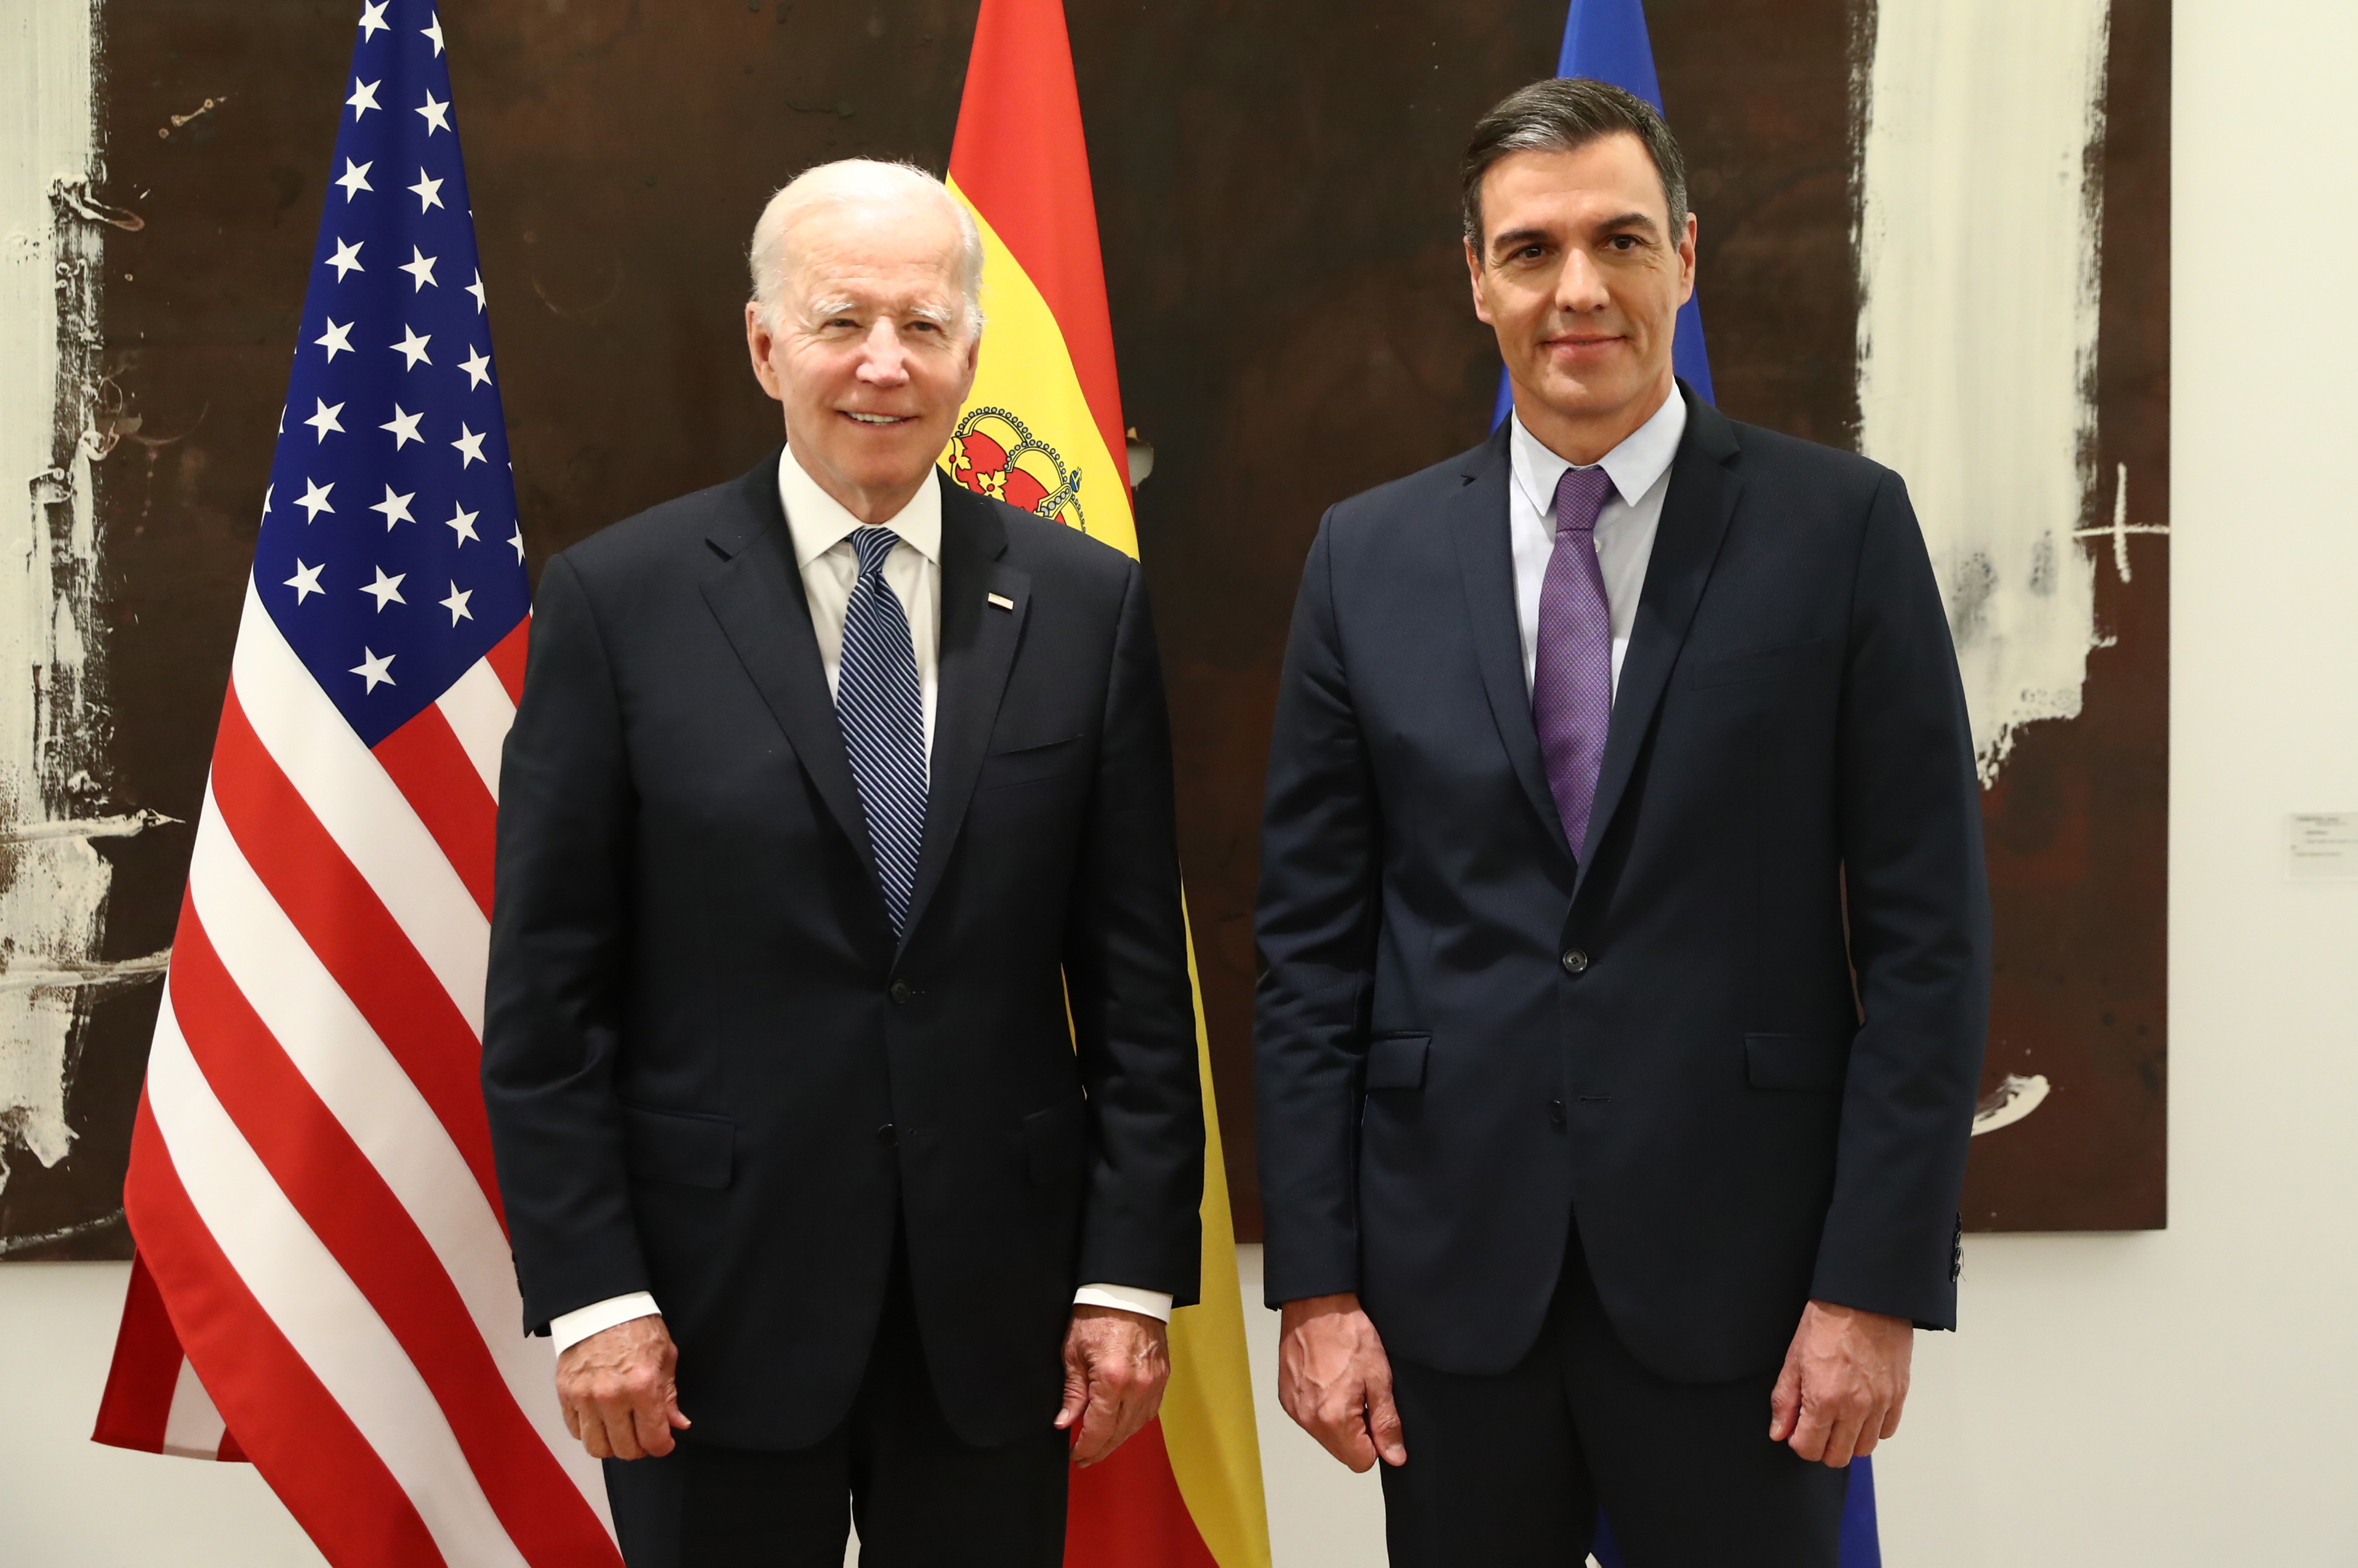 Spanish Prime Minister meets with US President at Moncloa Palace in Madrid